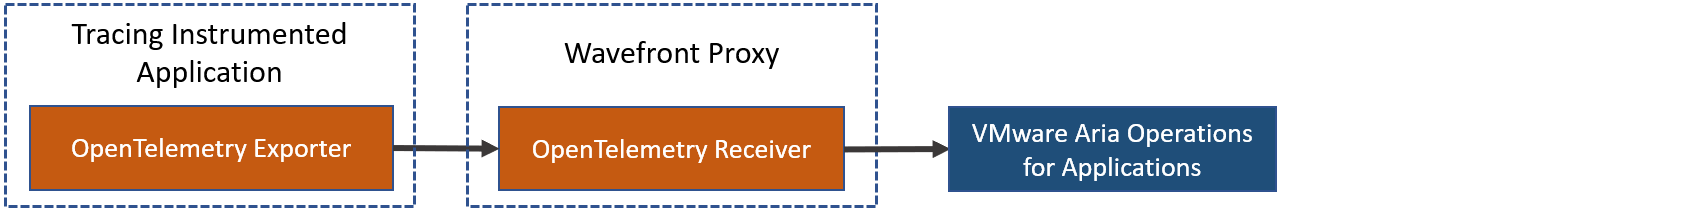 A data flow diagram that shows how the data flows from your application to the proxy, and then to Operations for Applications